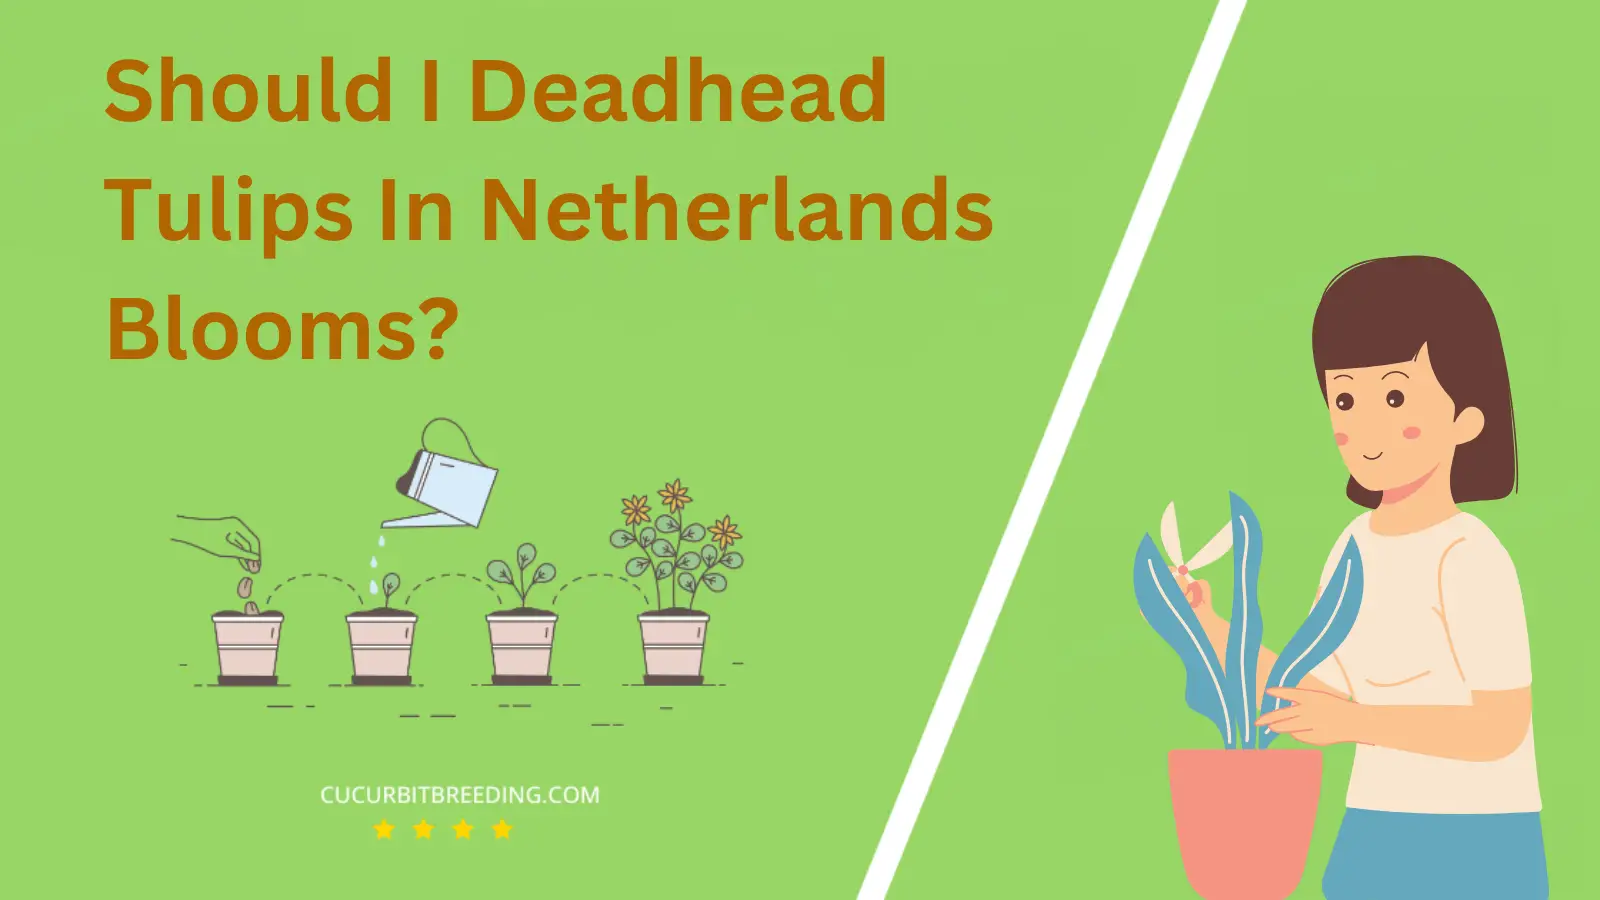 Should I Deadhead Tulips In Netherlands Blooms?